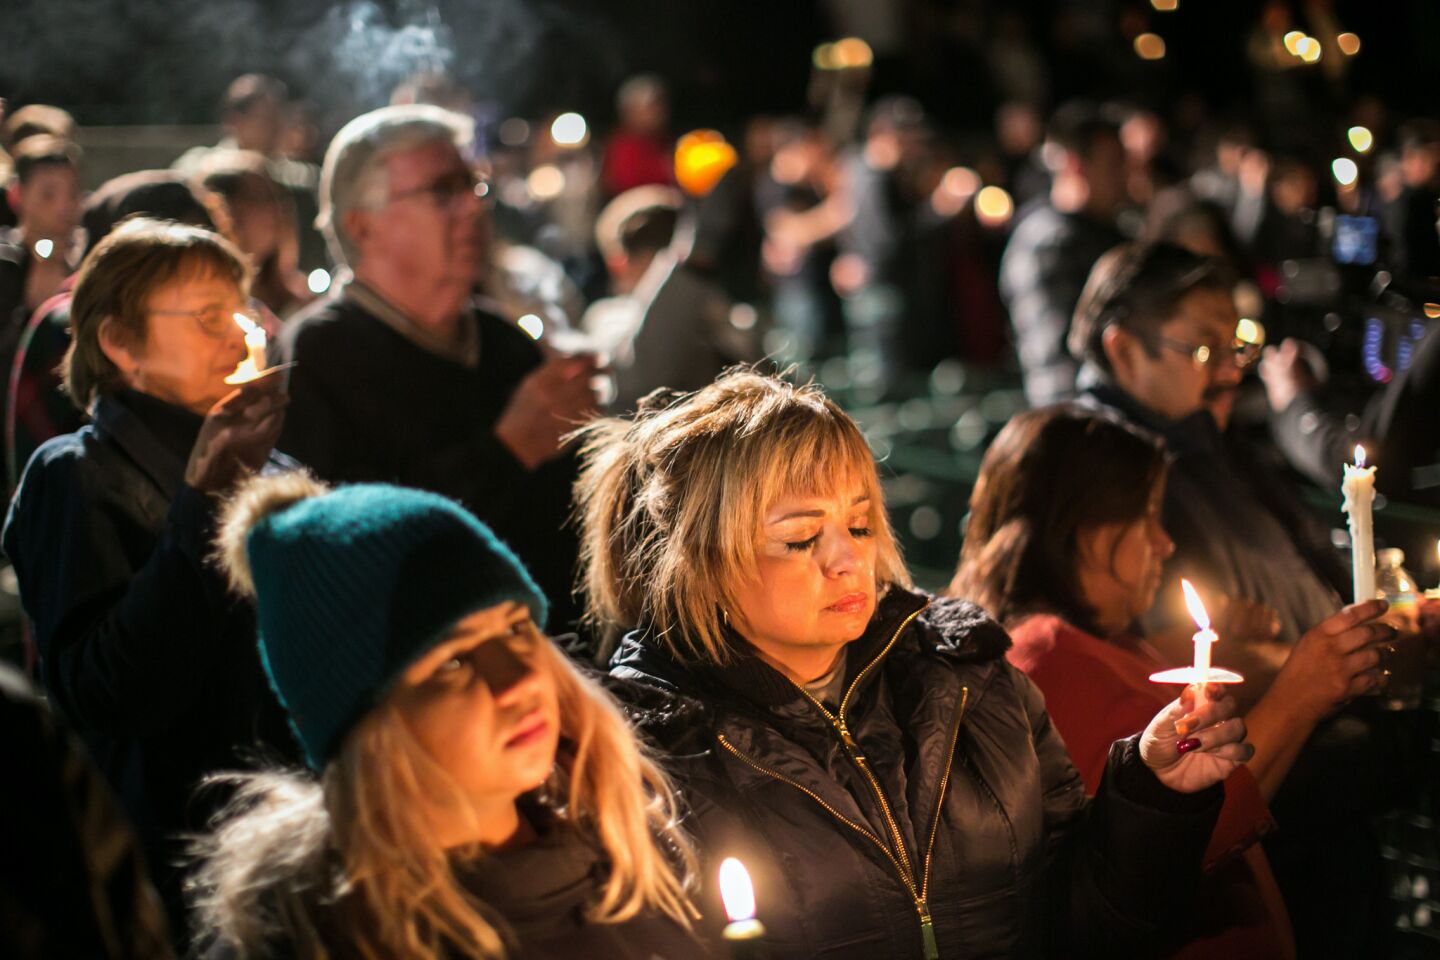 Josie Ramirez-Herndon, center, and her daughter, Chelsie Ramirez, bottom left, join other community members as they pray during a candlelight vigil.